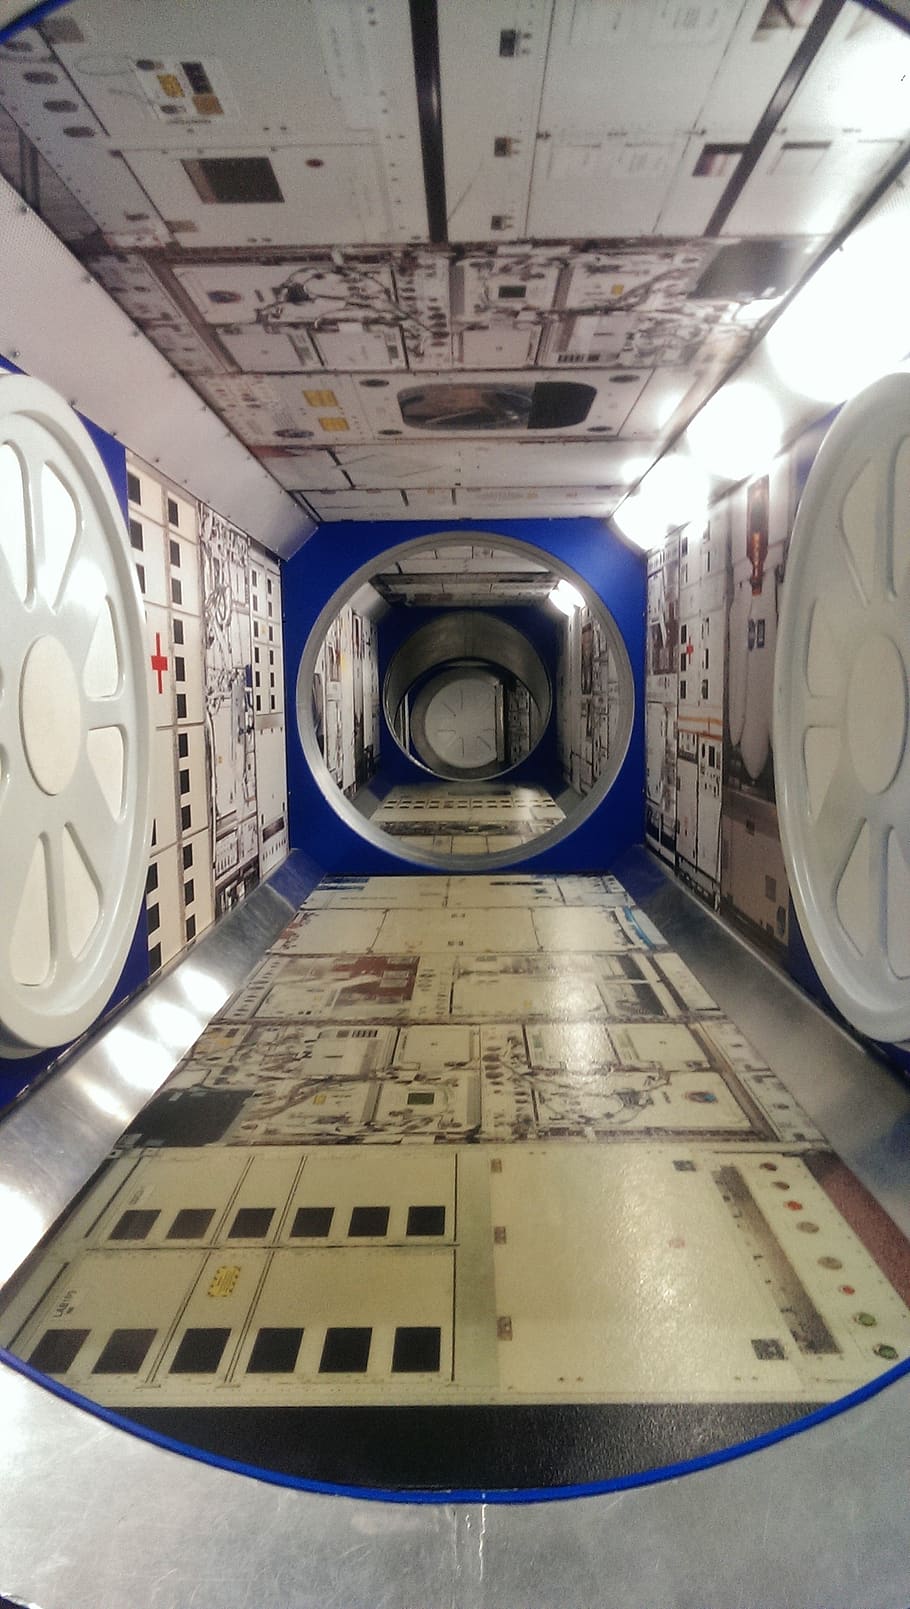 kennedy space center, spaceship, interior, iss, moon, rocket, space travel, science, research, space